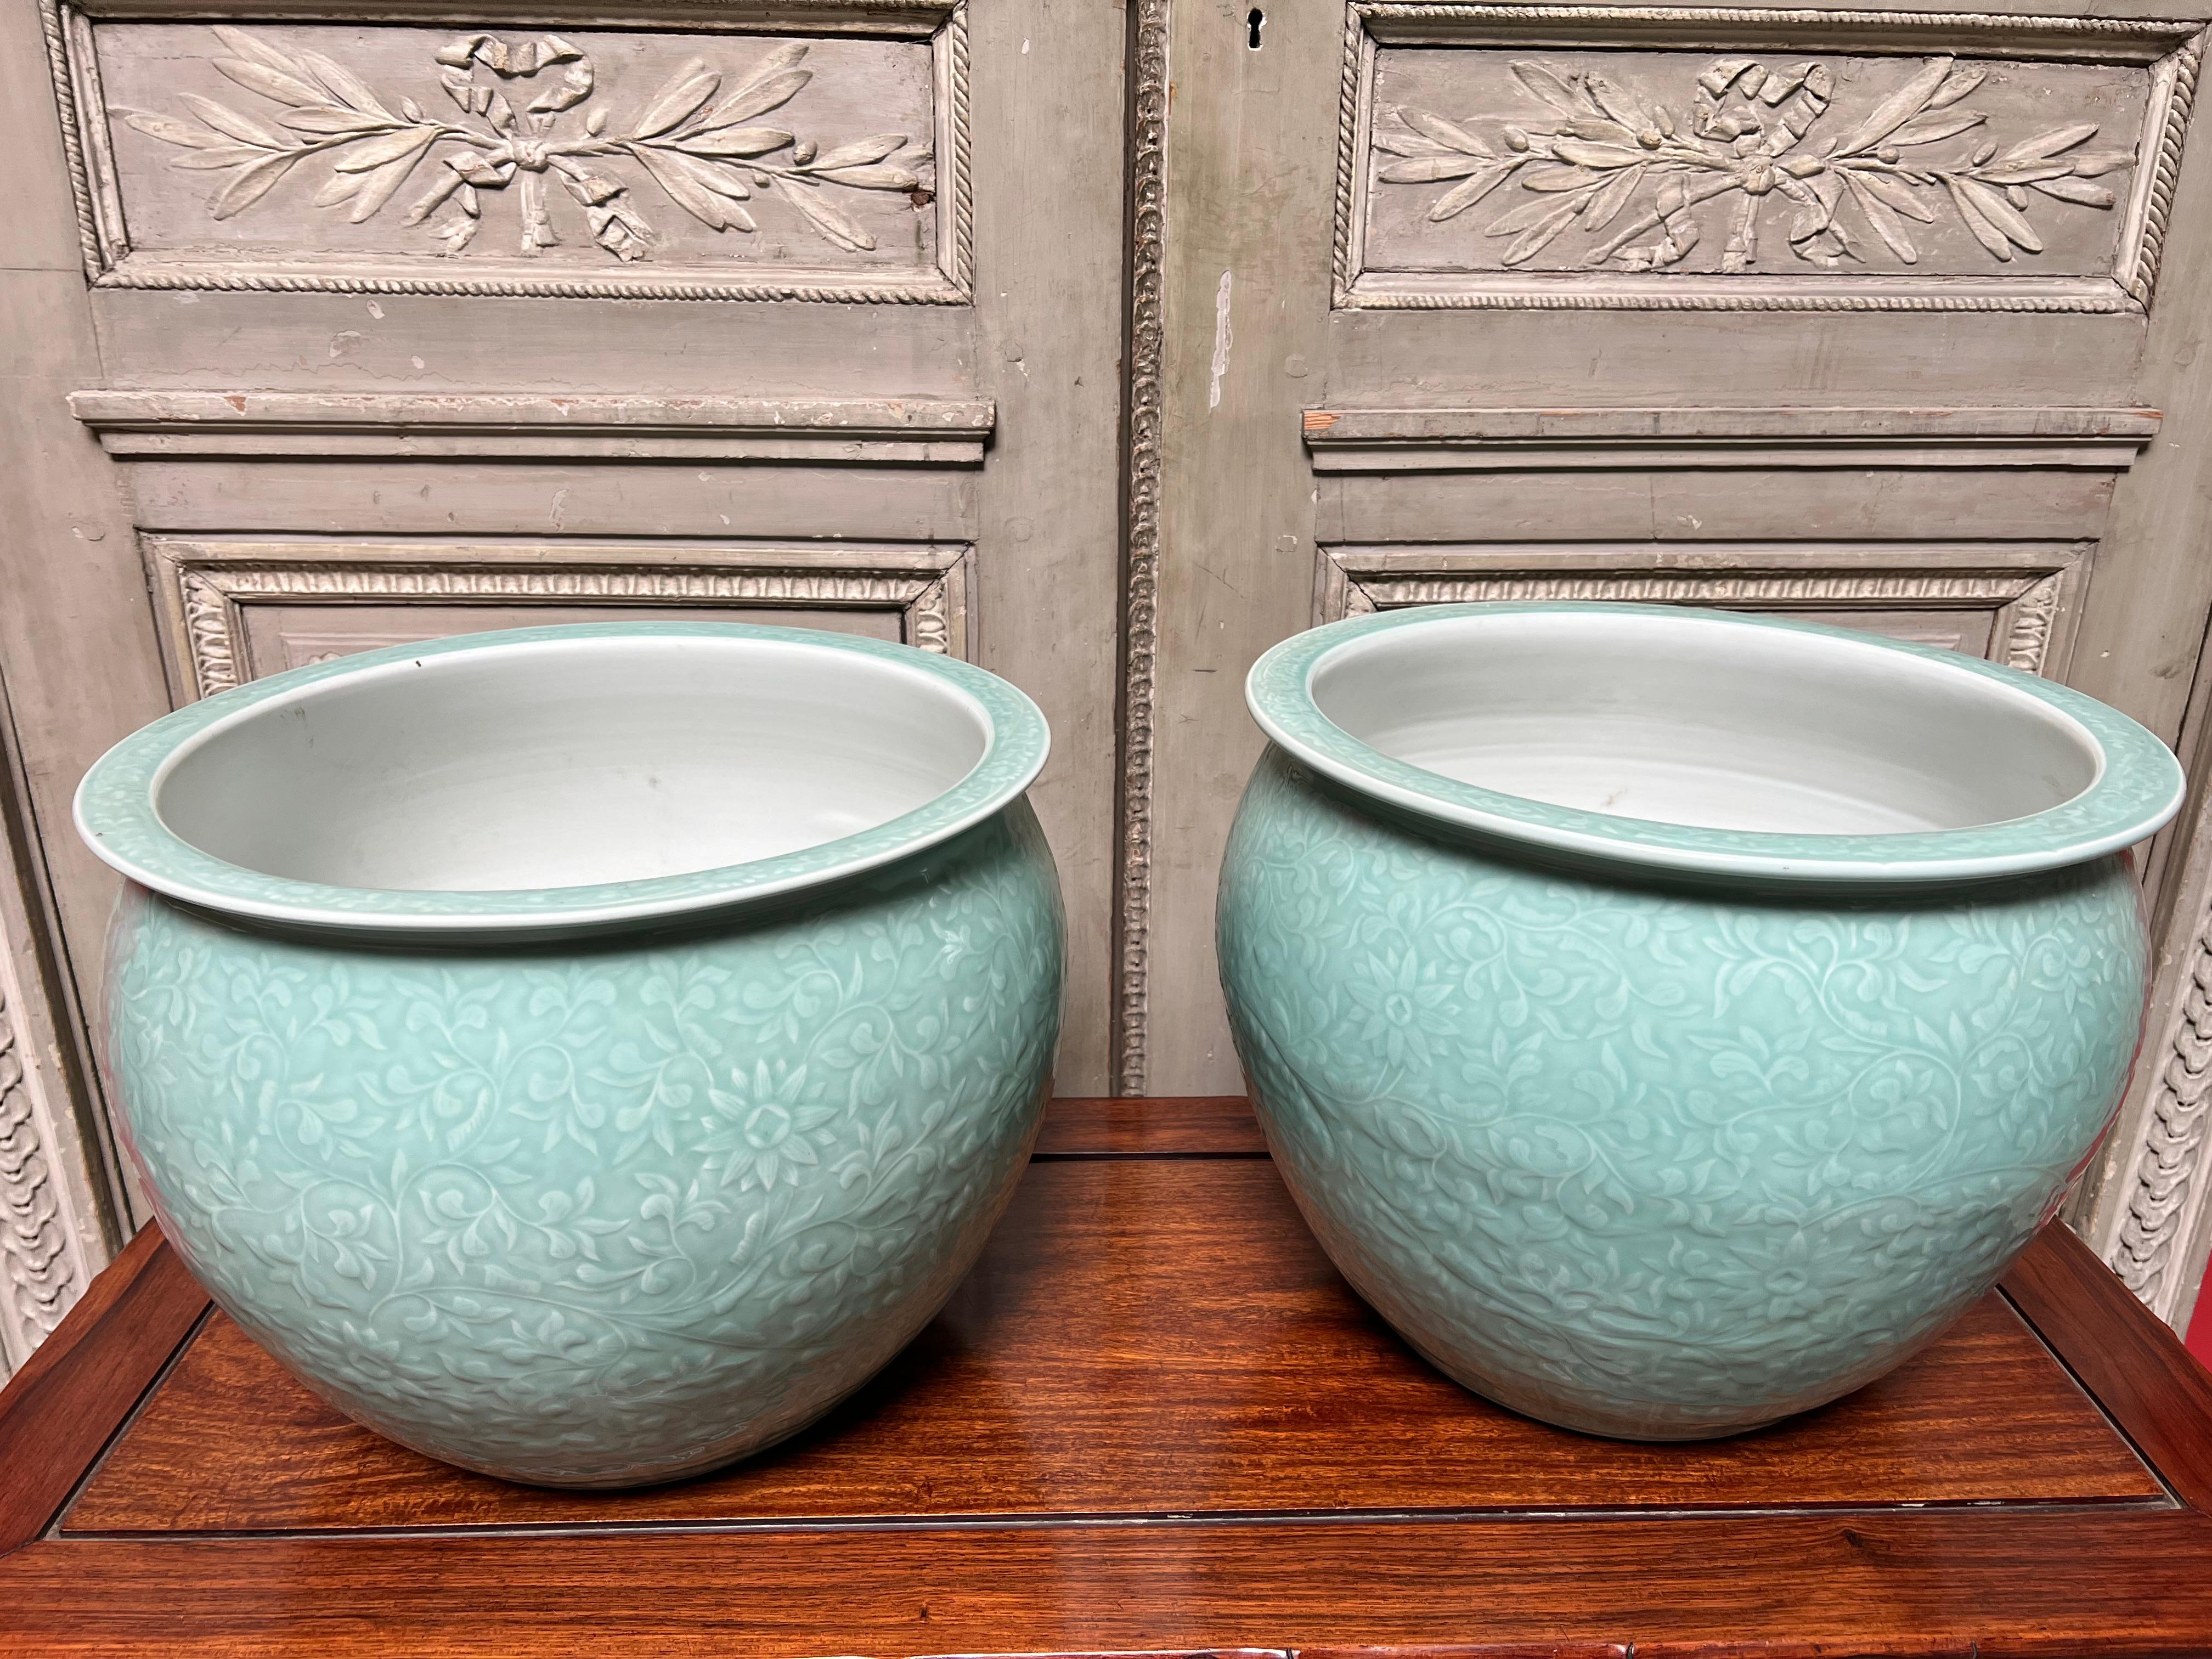 A pair of Chinese porcelain fish bowls with a celadon glaze and embosed floral design. These jardinieres are a nice scale with a beauiful colored glaze. They are in good condition and are very good reproductions of high quality from the 1980s.